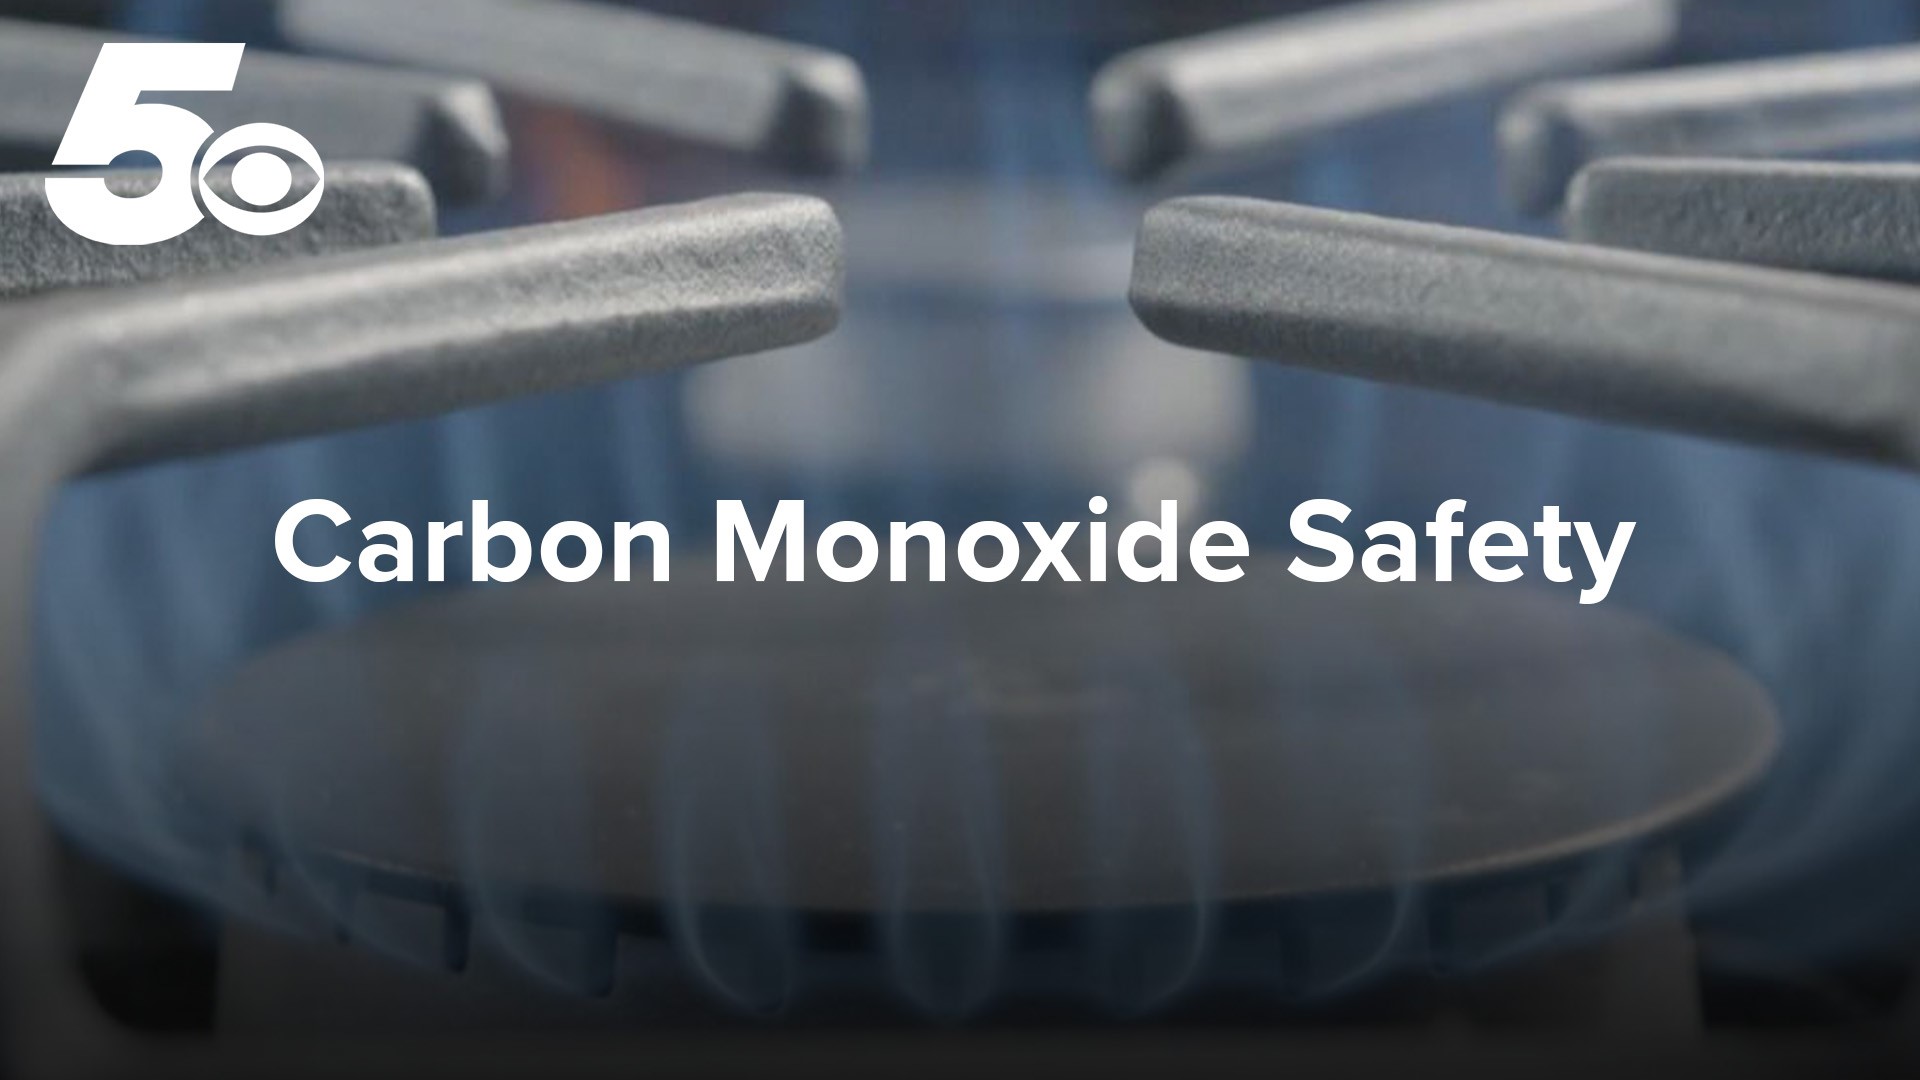 Experts explain why it's important to have a carbon monoxide detector in your home, especially during the winter.